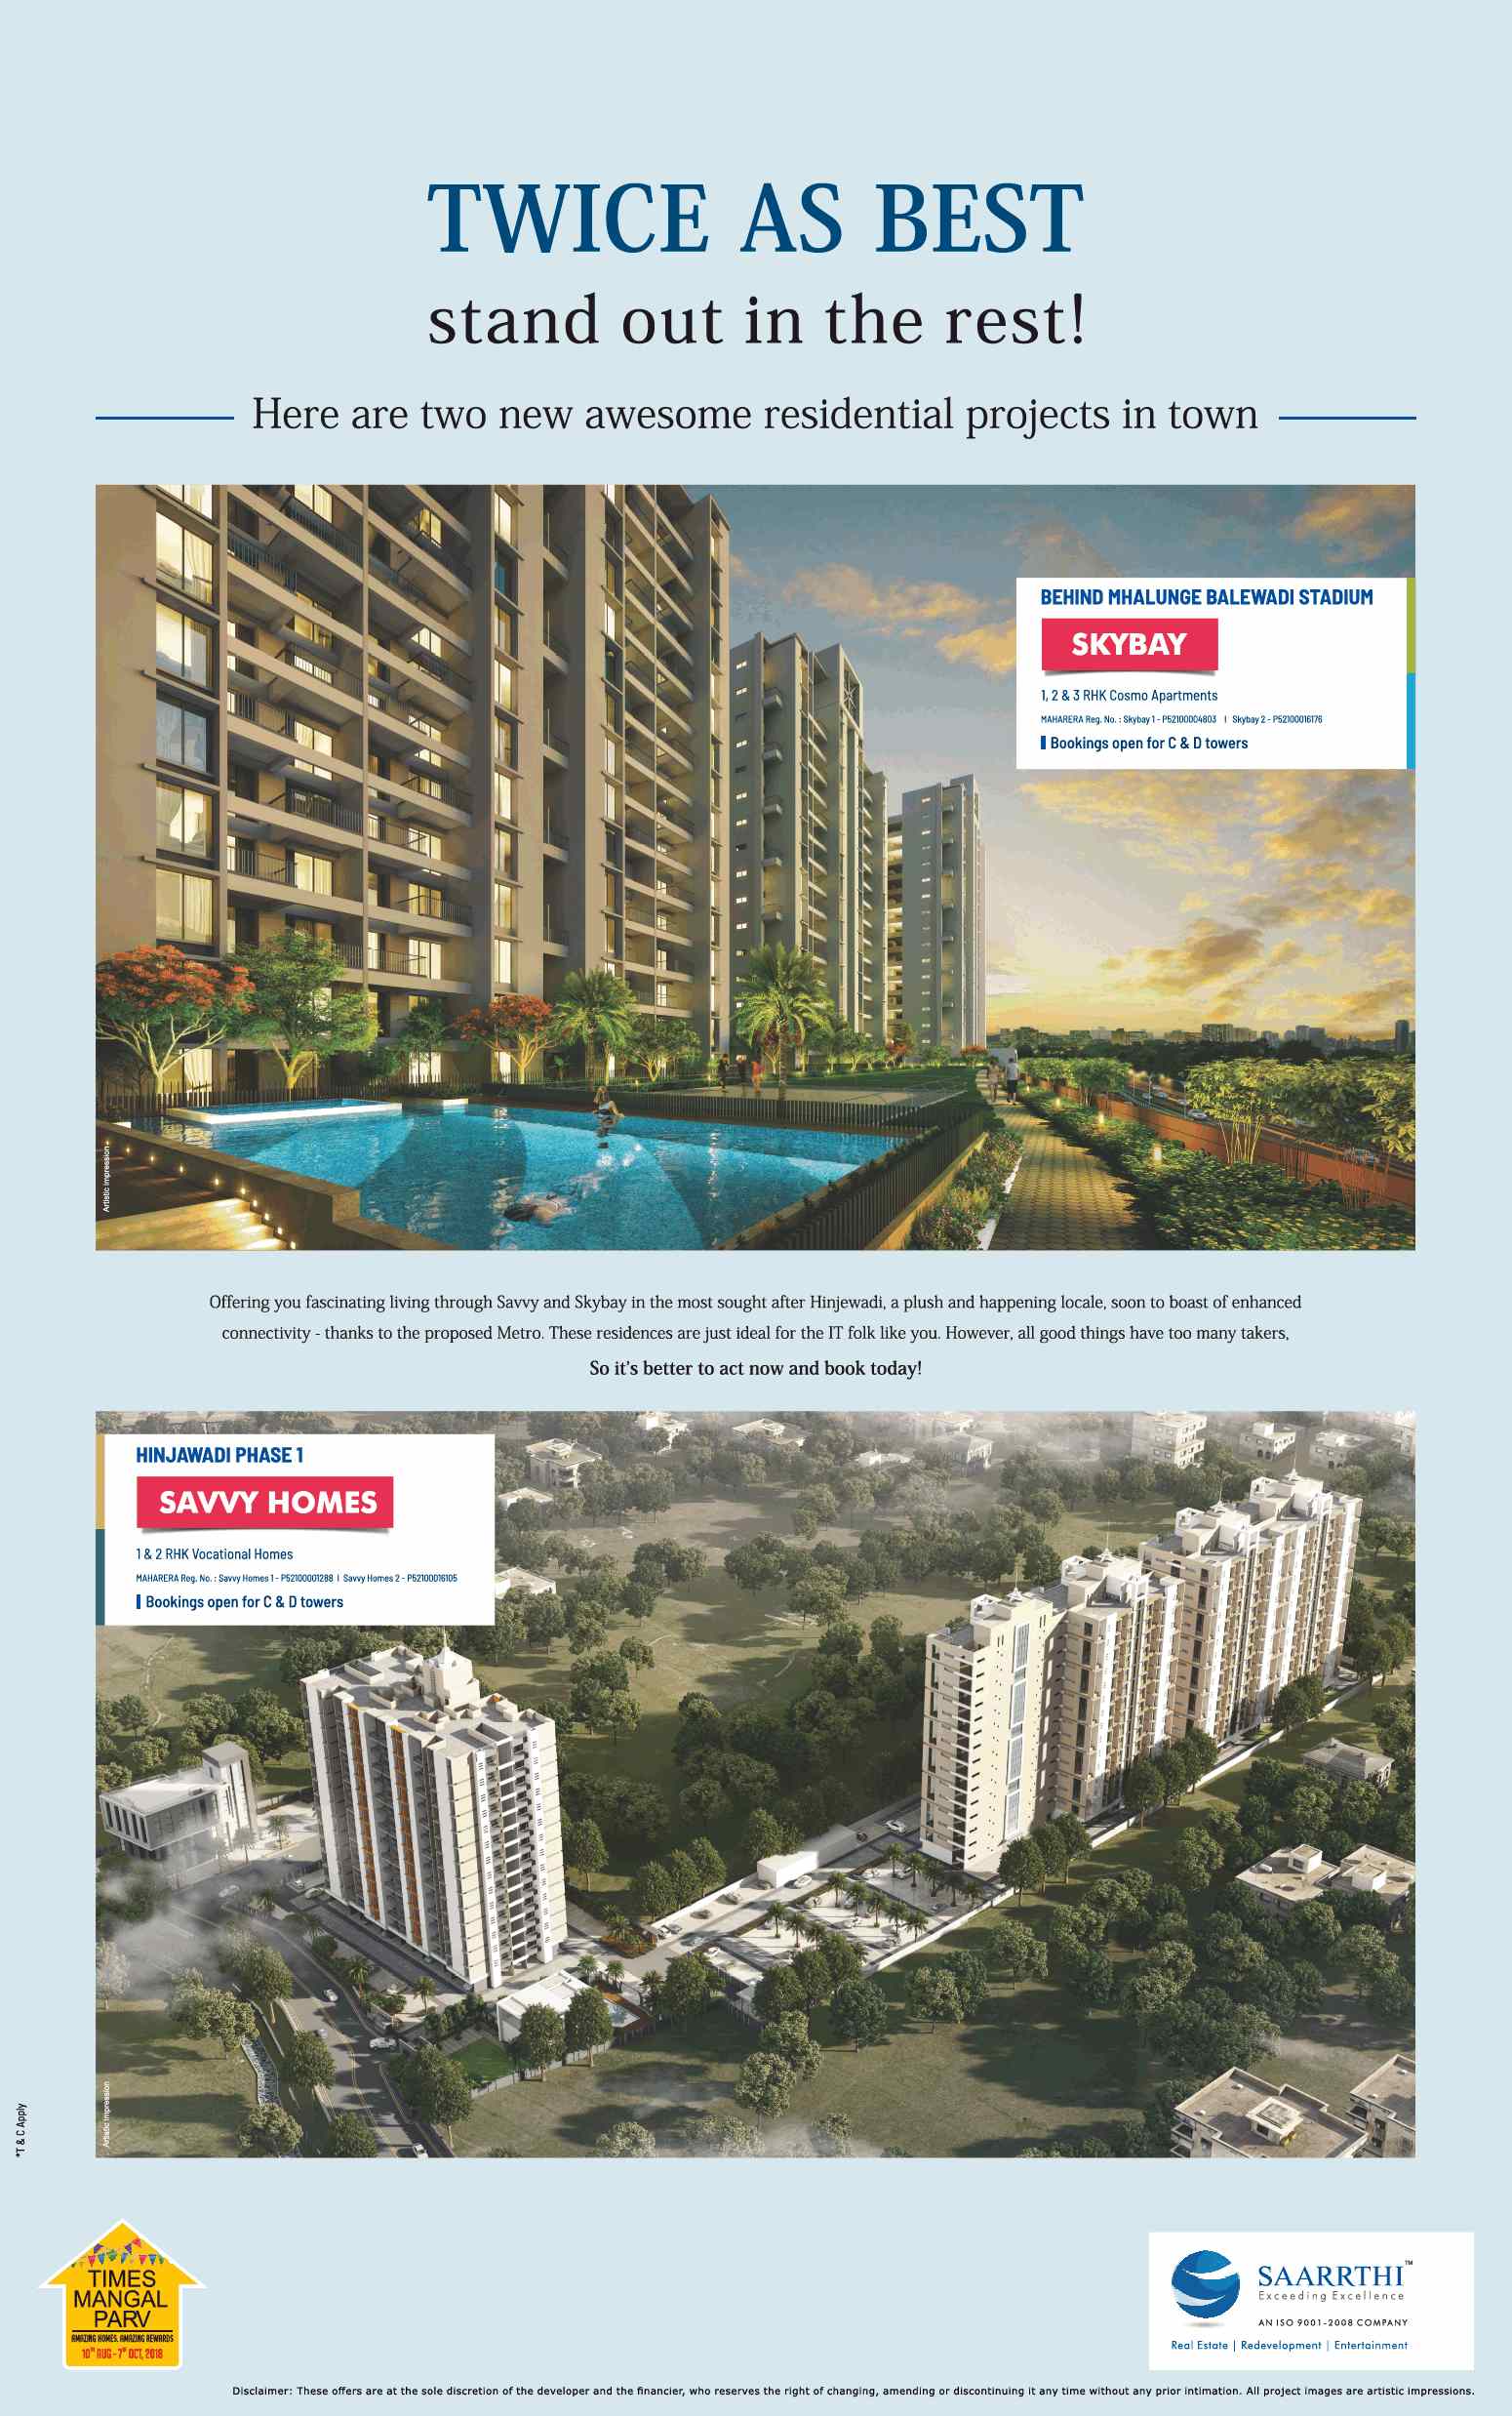 Awesome residential projects by Saarrthi Group for investment in Pune